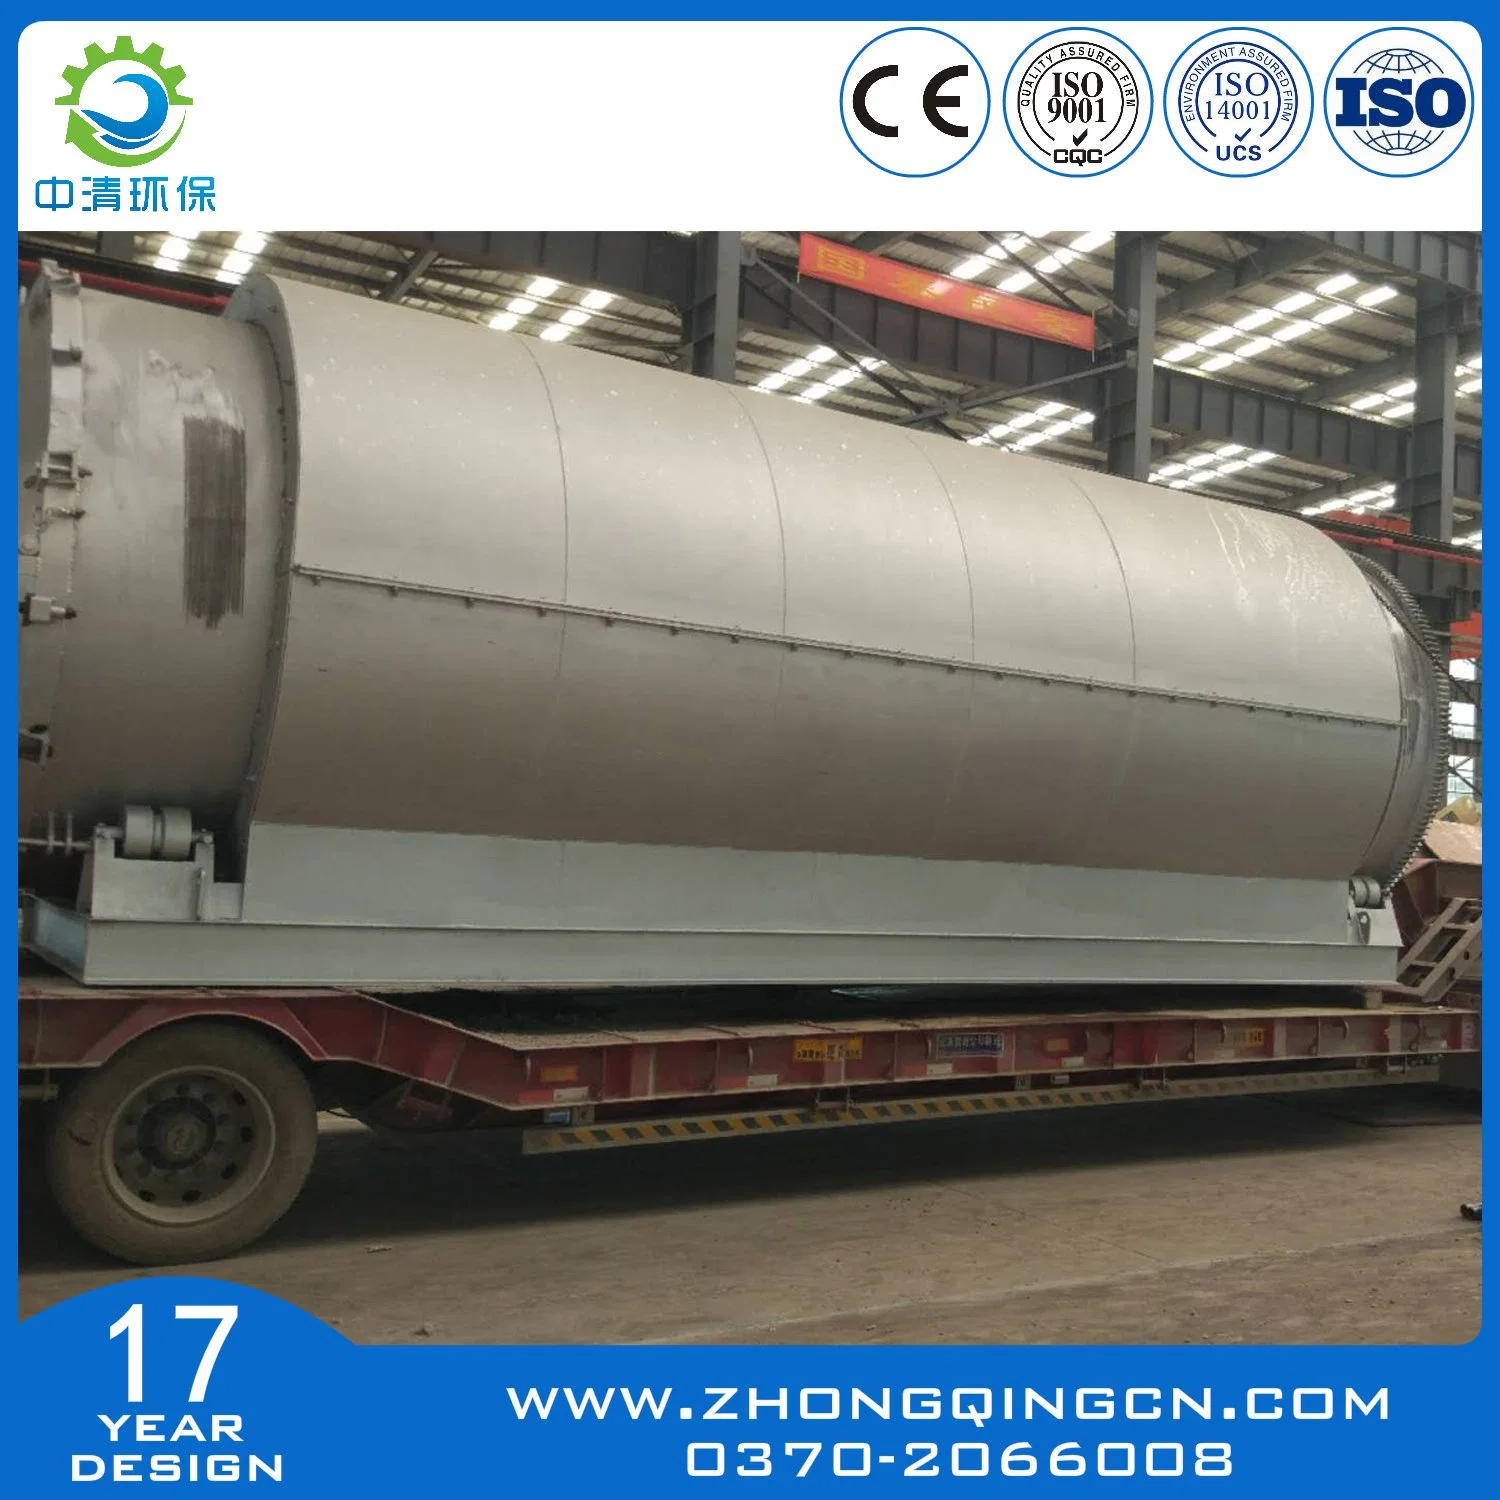 Used Plastics/Used Rubber/Used Tires Pyrolysis Machine/Recycling Machine/Processing Machine/Waste Treatment to Oil with CE, SGS, ISO, BV